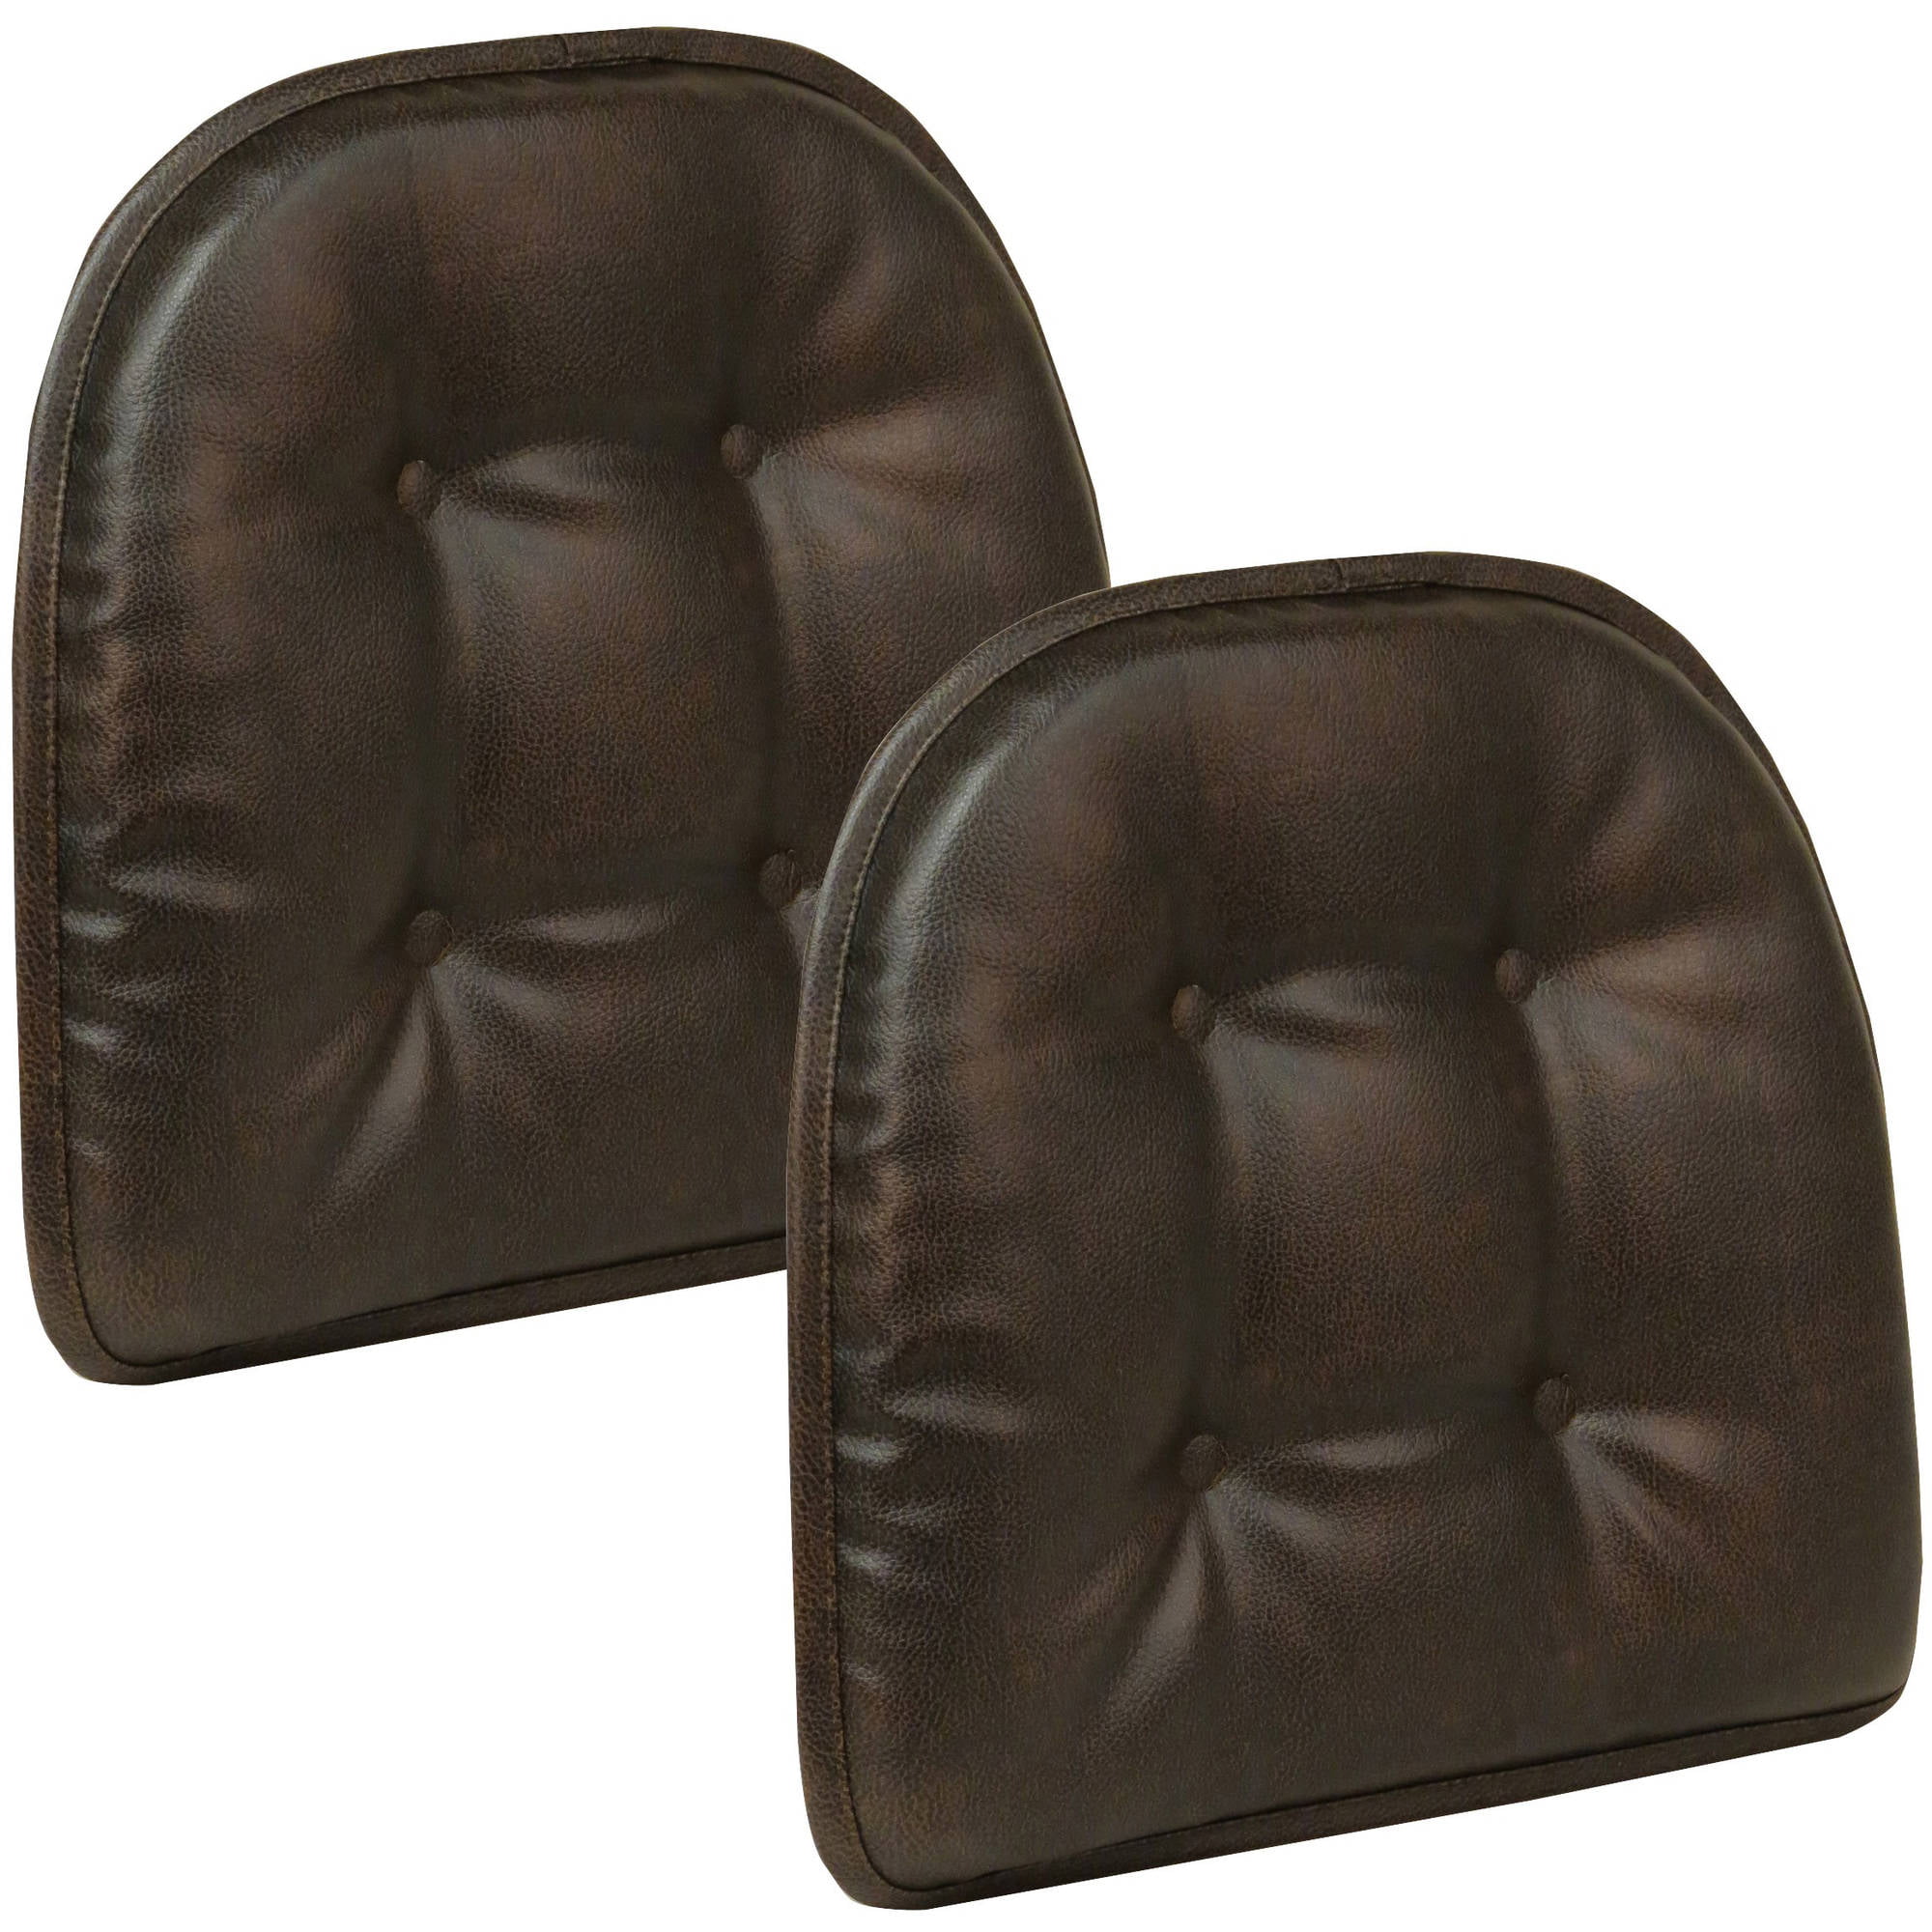 Faux Leather Tufted Chair Cushions Set, Faux Leather Dining Room Chair Cushions